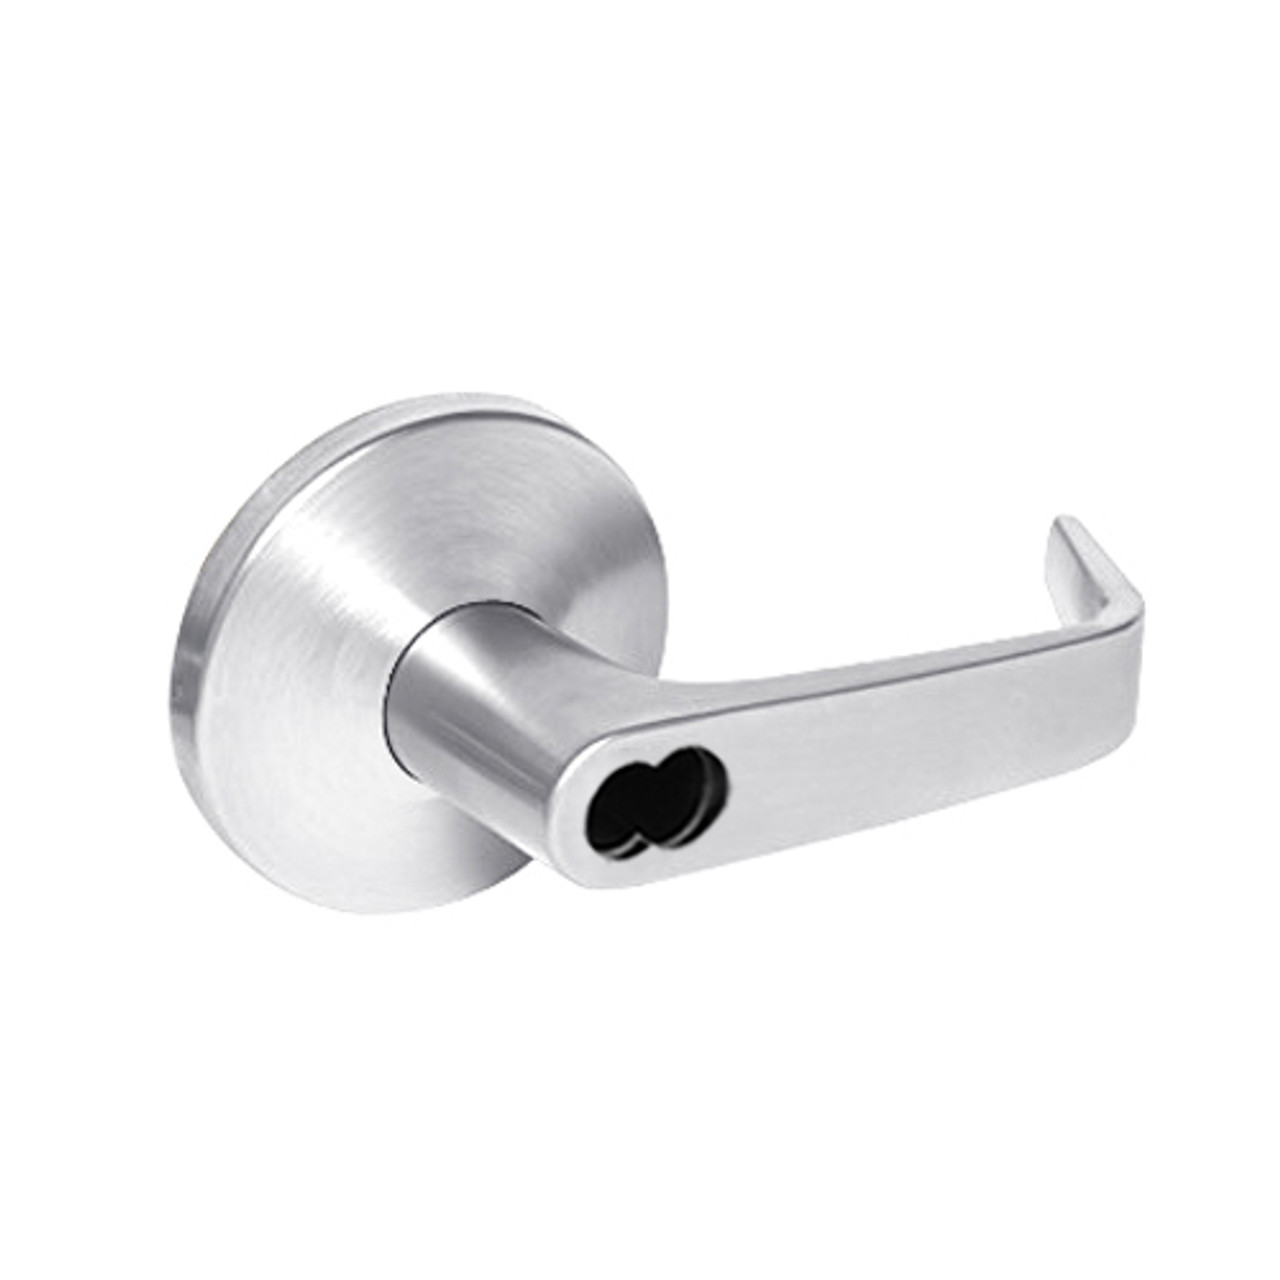 9K37DR15LSTK625 Best 9K Series Special Function Cylindrical Lever Locks with Contour Angle with Return Lever Design Accept 7 Pin Best Core in Bright Chrome